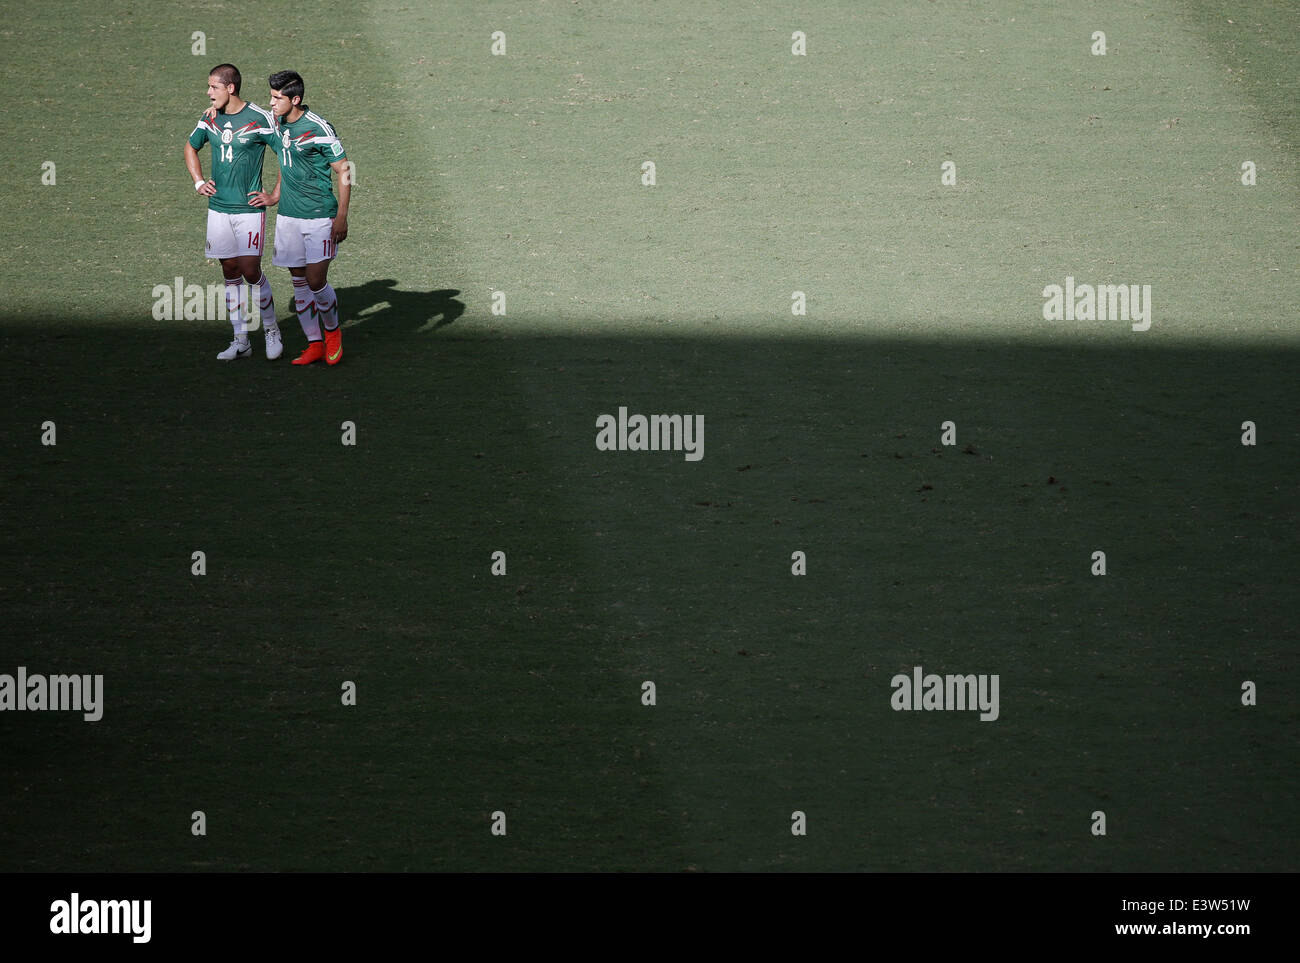 Fortaleza, Brazil. 29th June, 2014. Mexico's Javier Hernandez (L) and Alan Pulido react after a Round of 16 match between Netherlands and Mexico of 2014 FIFA World Cup at the Estadio Castelao Stadium in Fortaleza, Brazil, on June 29, 2014. Netherlands won 2-1 over Mexico and qualified for Quarter-finals on Sunday. Credit:  Liao Yujie/Xinhua/Alamy Live News Stock Photo